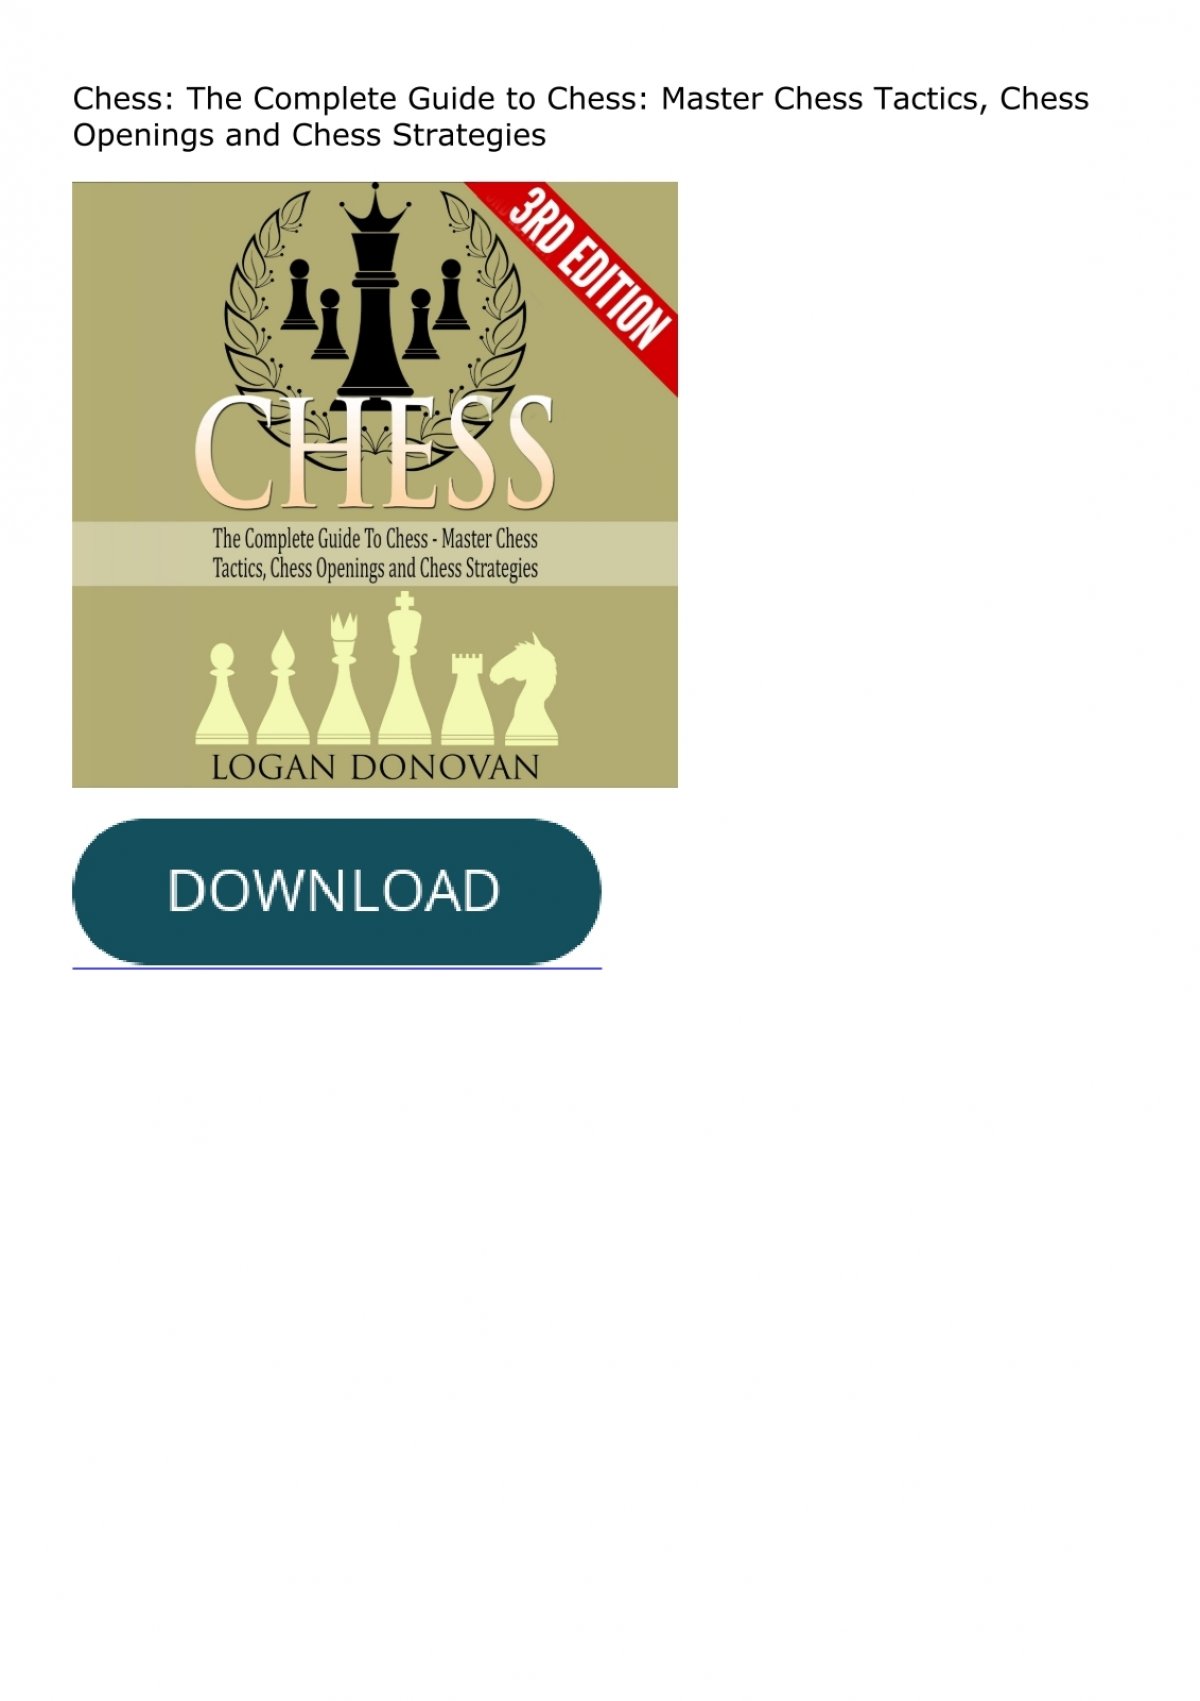 Chess: The Complete Guide To Chess - Master: Chess Tactics, Chess